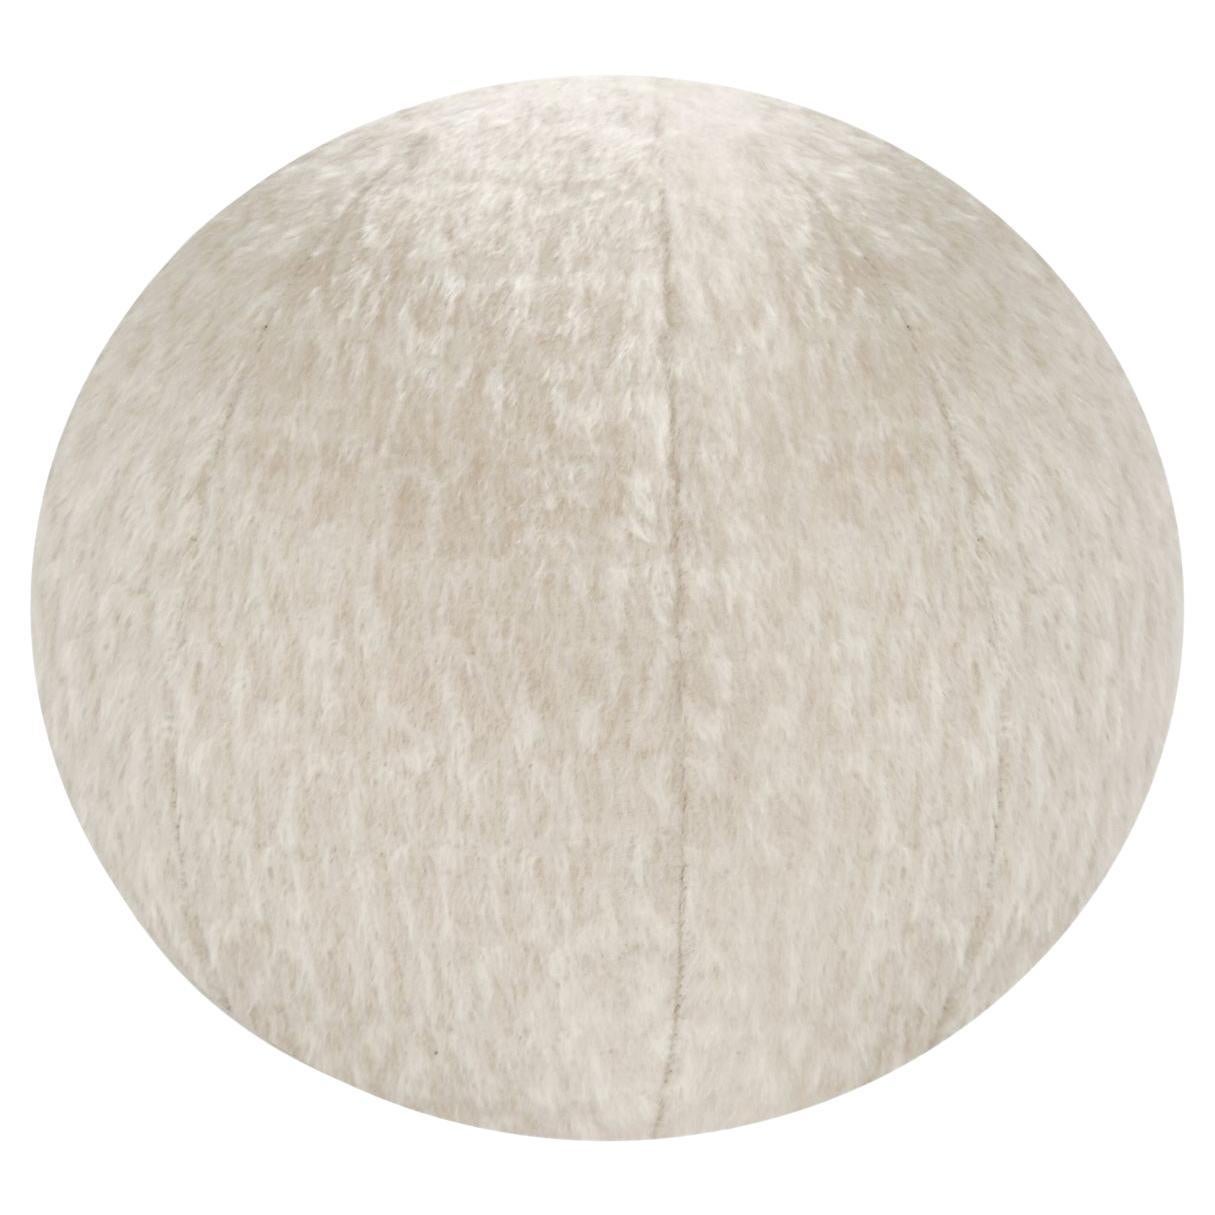 Orb Accent Pillow in Ivory Cream Alpaca by Holly Hunt For Sale